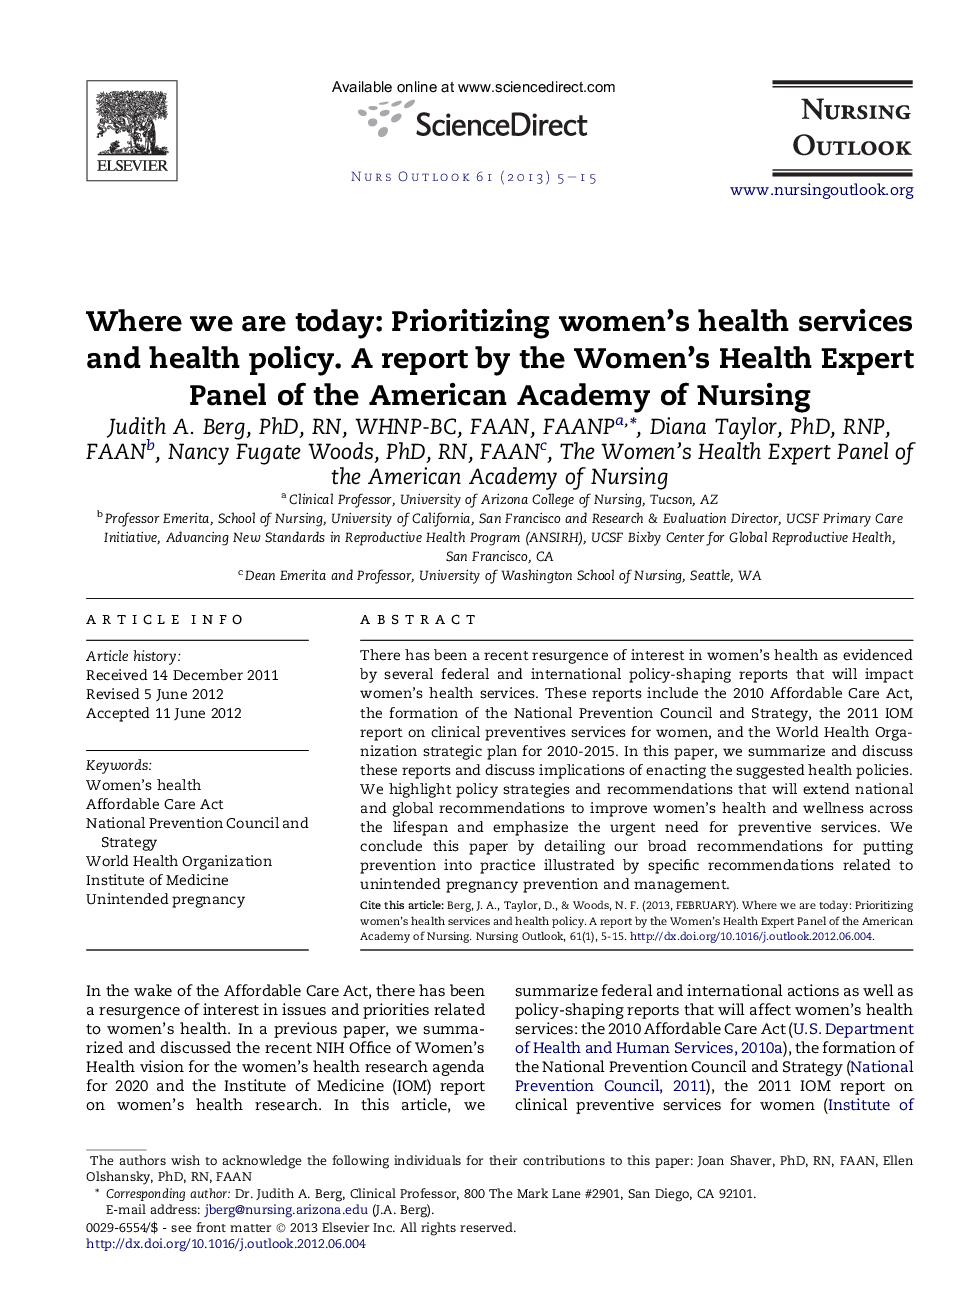 Where we are today: Prioritizing women’s health services and health policy. A report by the Women's Health Expert Panel of the American Academy of Nursing 